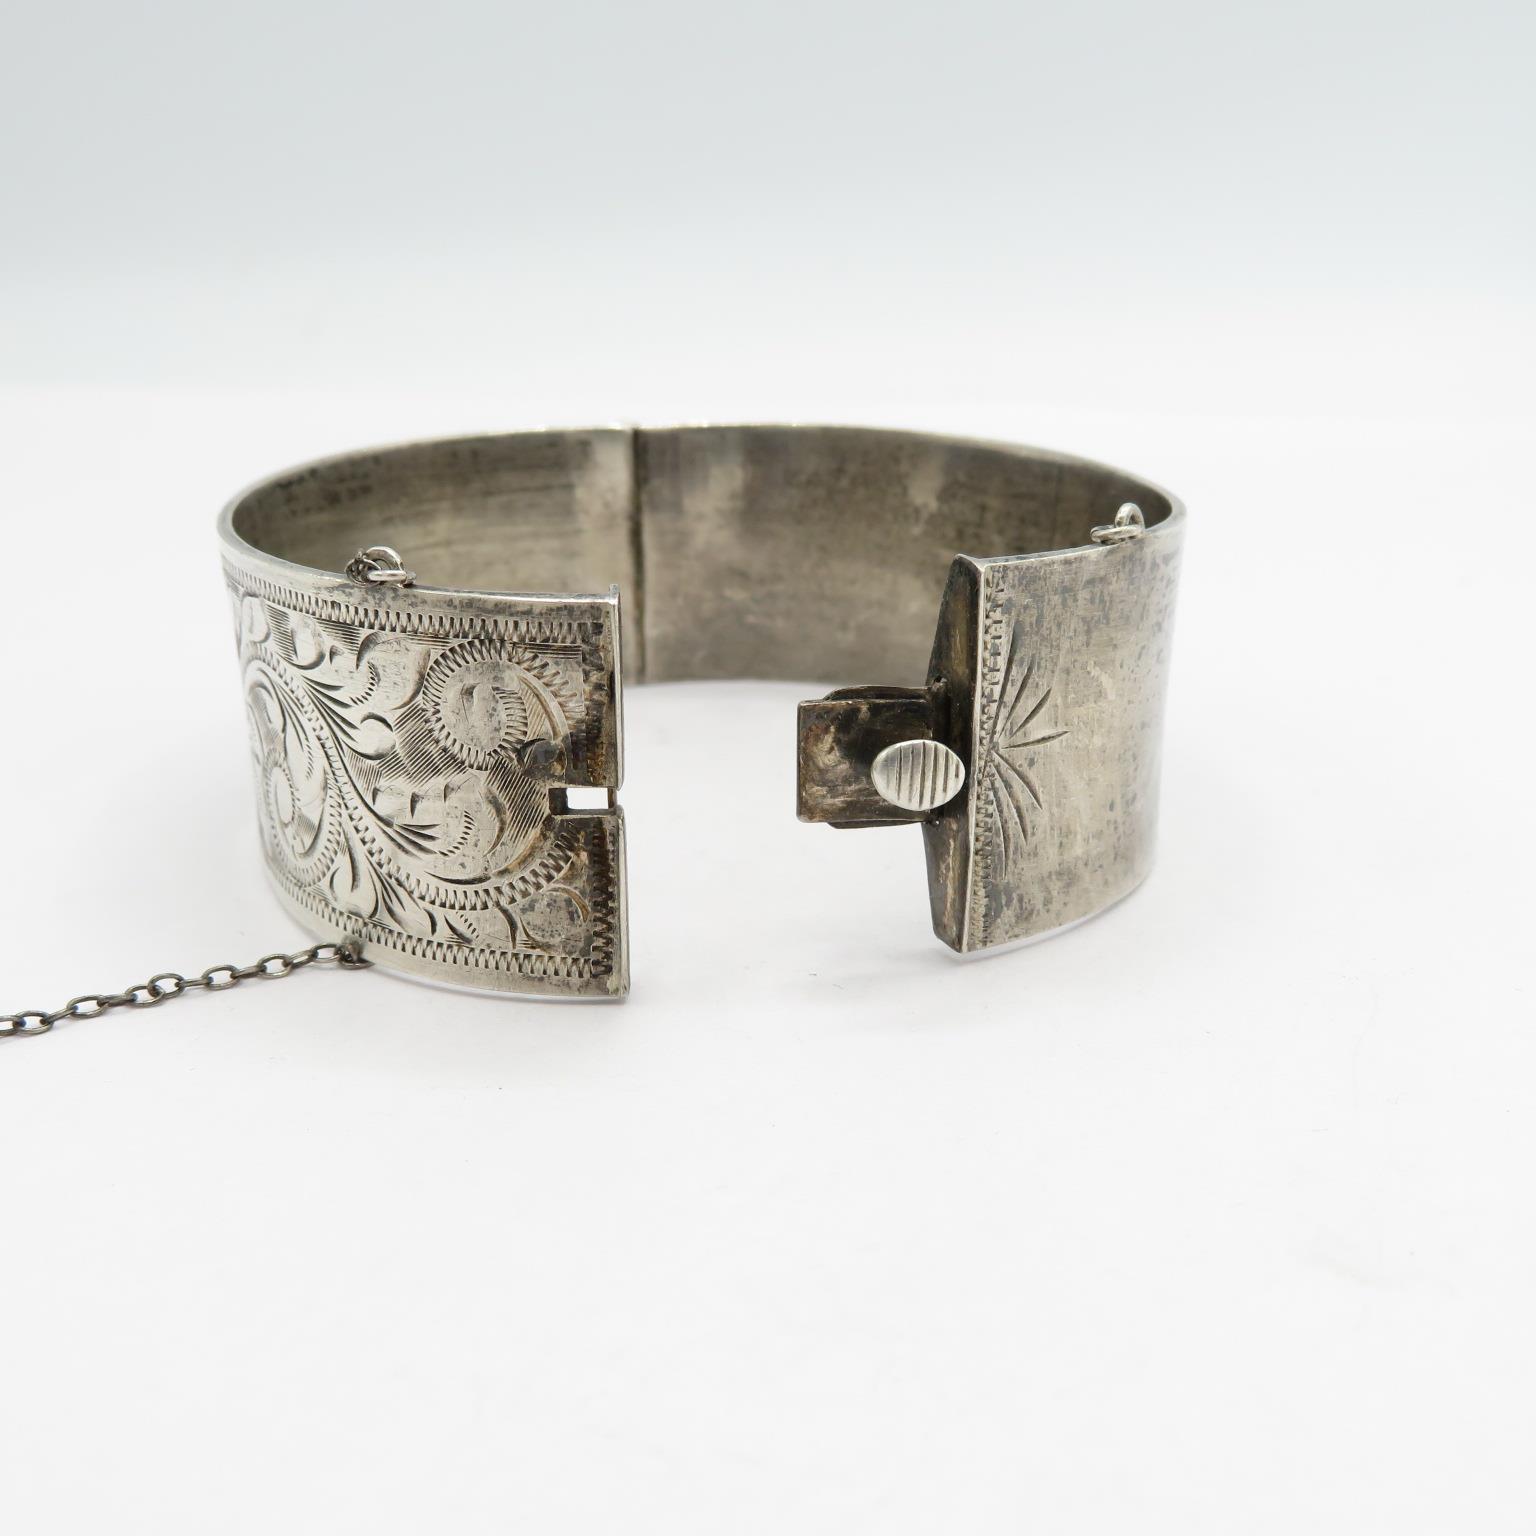 An antique cuff bangle 63g - Image 4 of 5